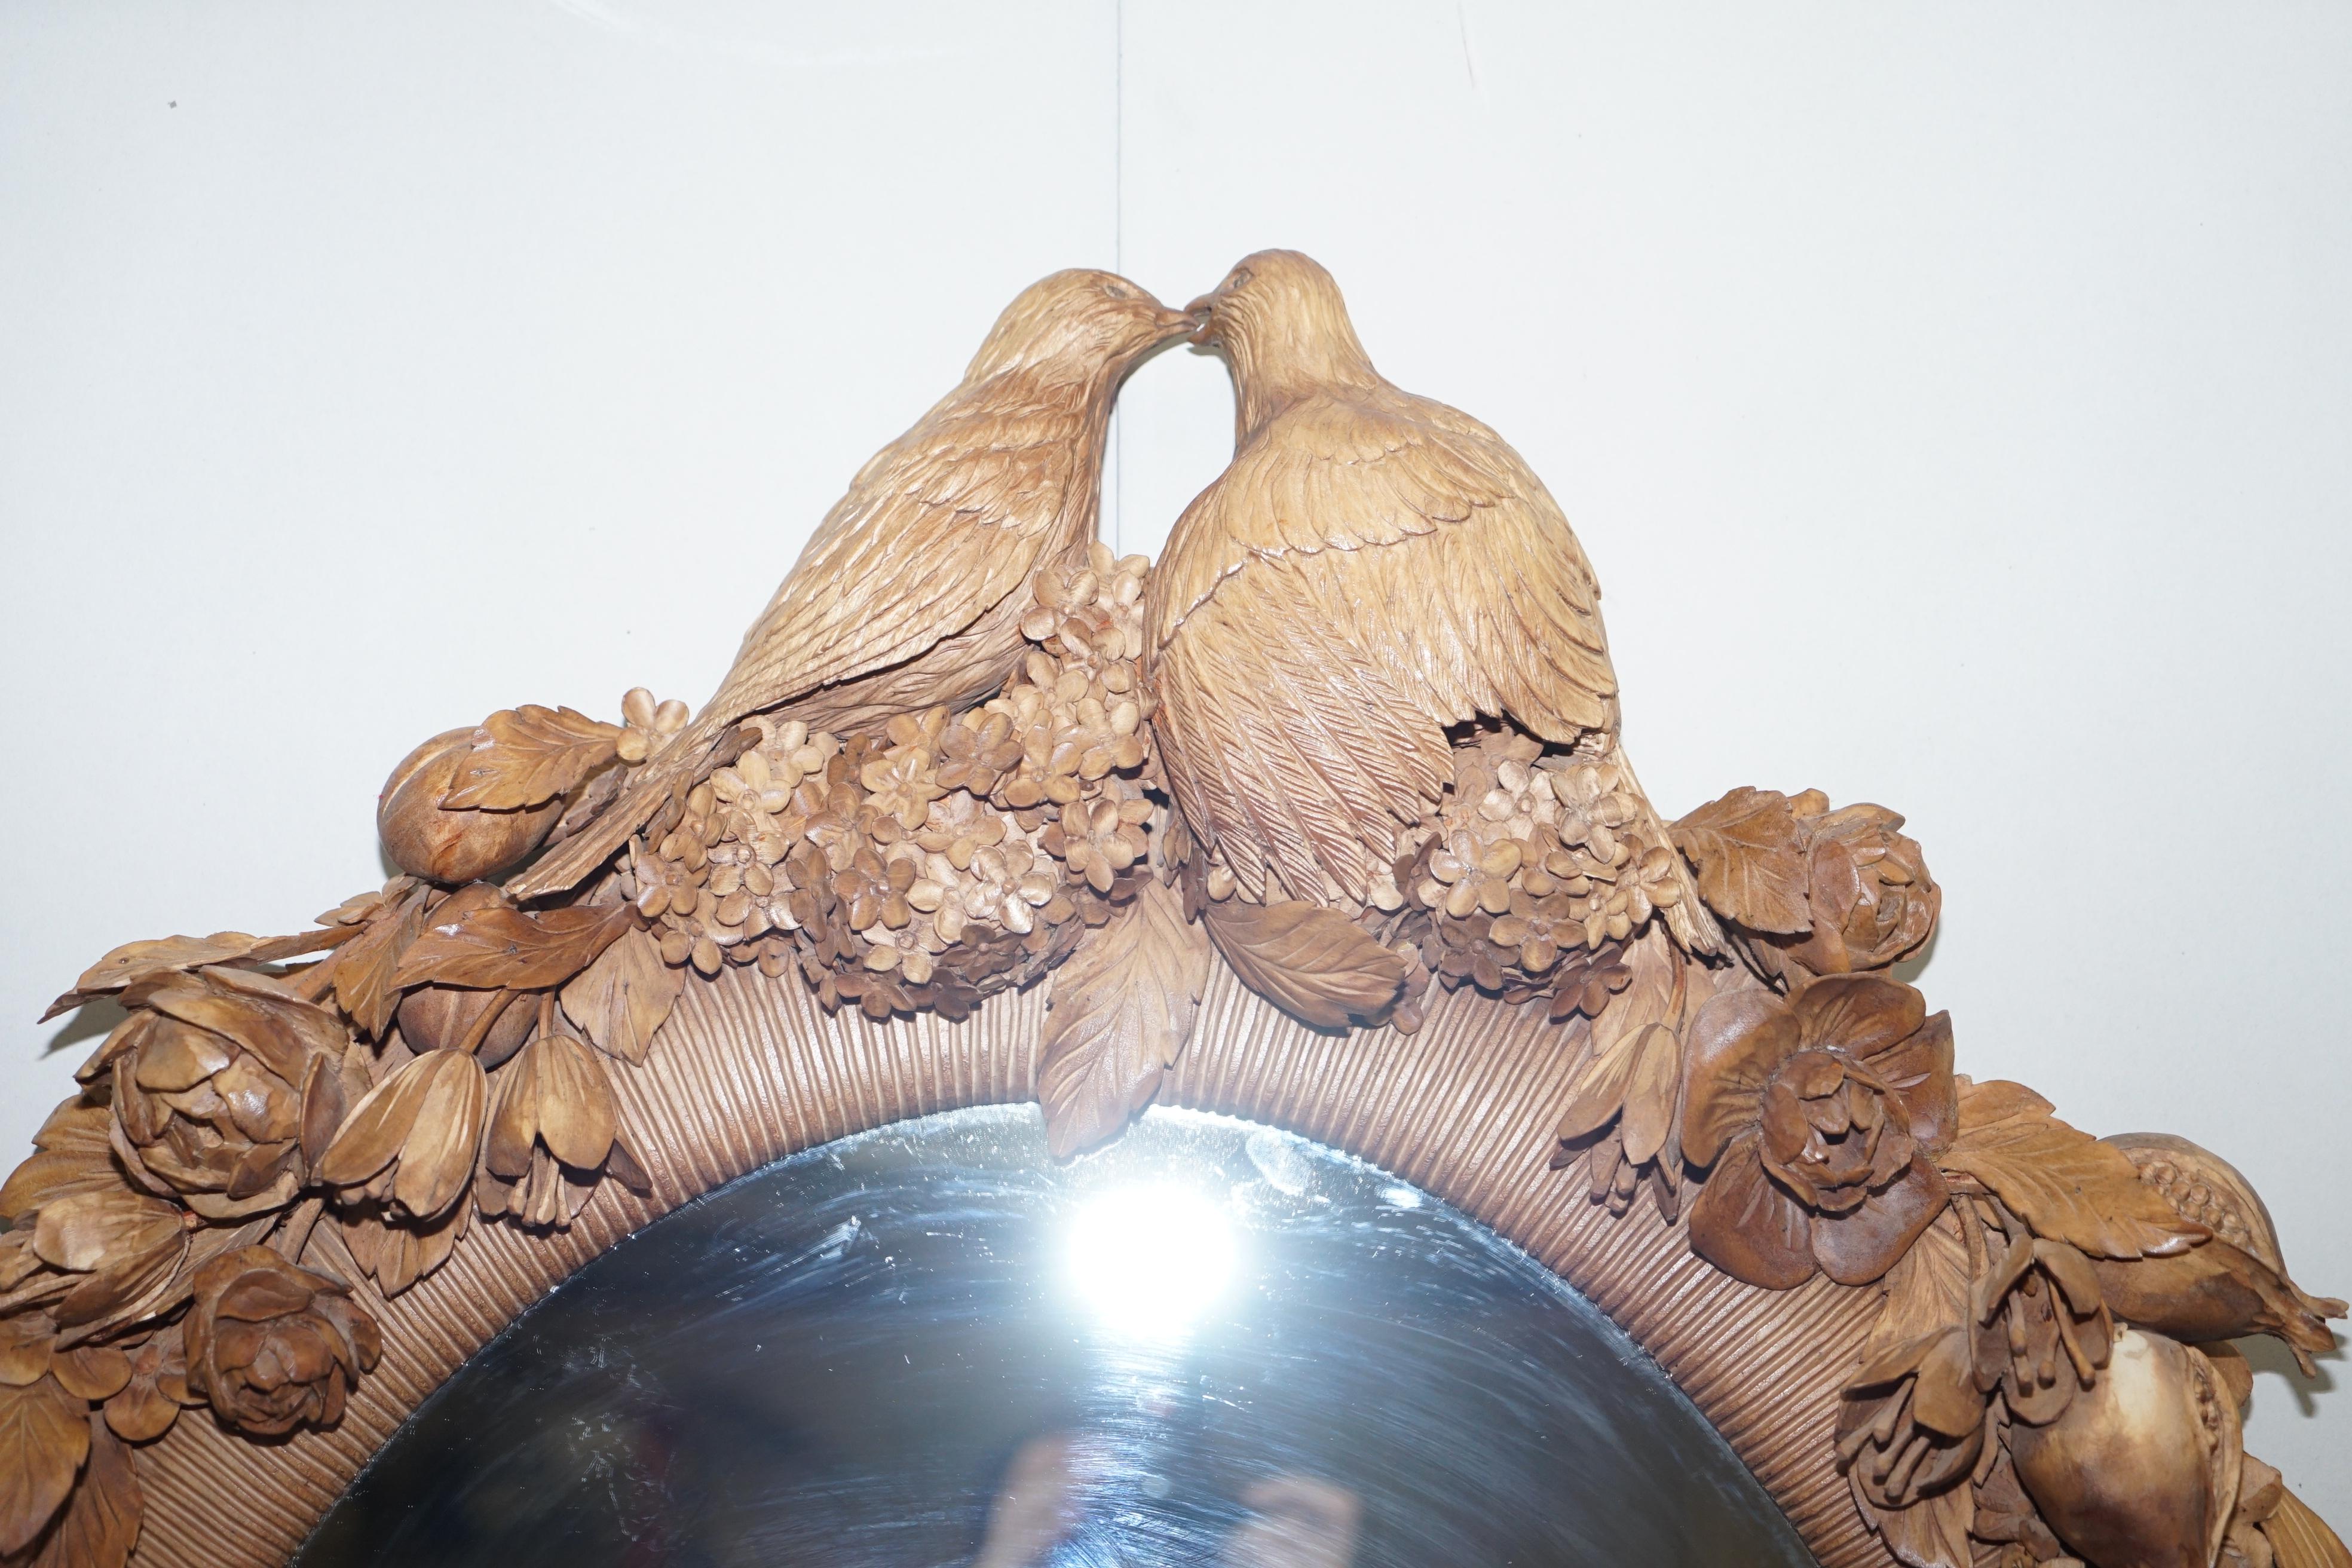 We are delighted to offer for sale this stunning hand carved romantic loves heavily floral carved wall mirror in the style Grinling Gibbons

The mirror is very ornately carved and delicate, the piece of pine you can see on the base has been